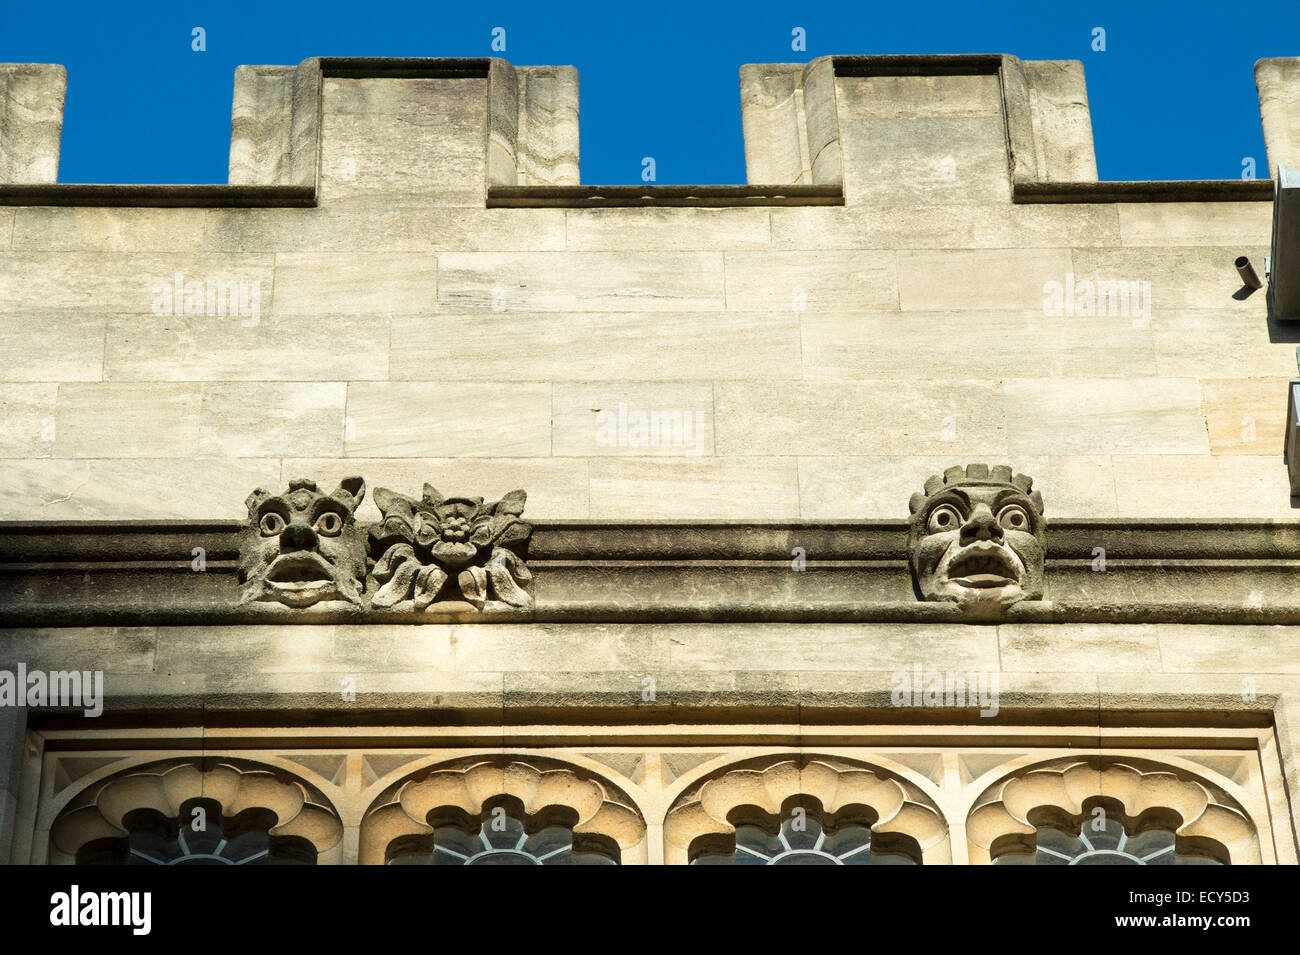 Building architecture and stone carvings in Schools Quadrangle, Bodleian Library, Oxford, England Stock Photo